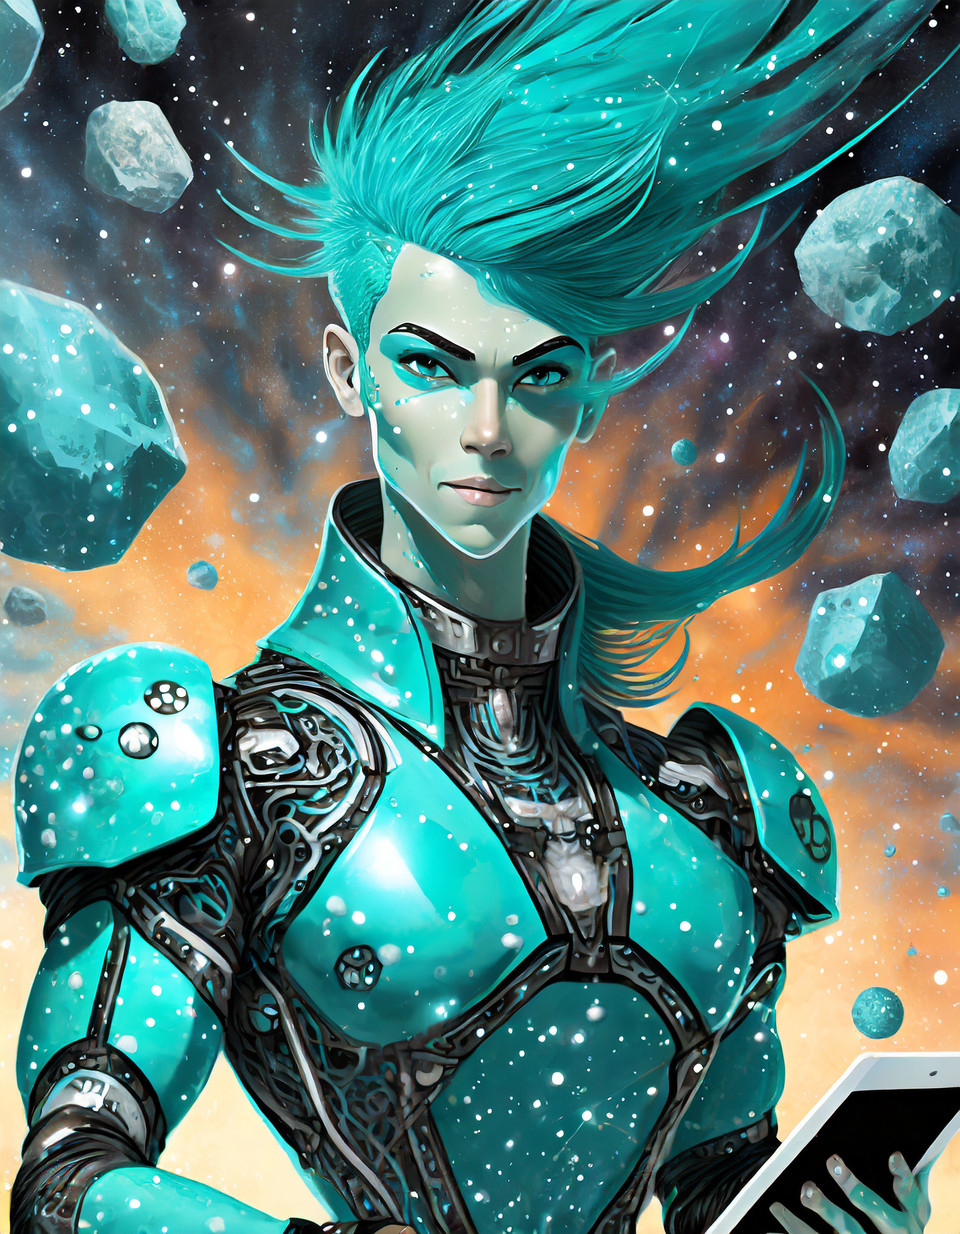 turquoise superheroine consisting of ones and zeros with turquoise hair, with ipad, flies through space